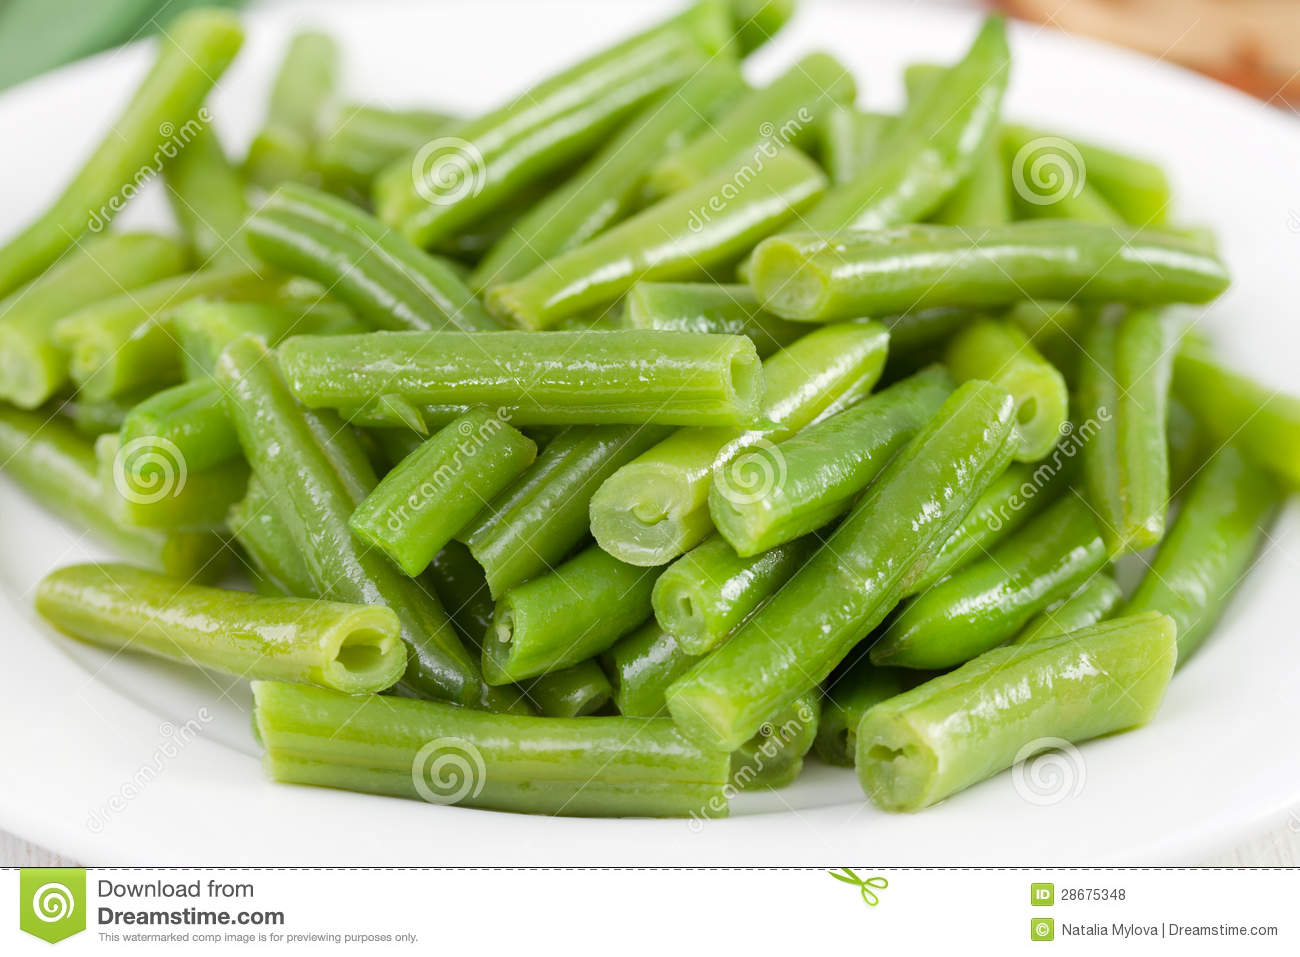 Boiled Green Beans Royalty Free Stock Photos   Image  28675348